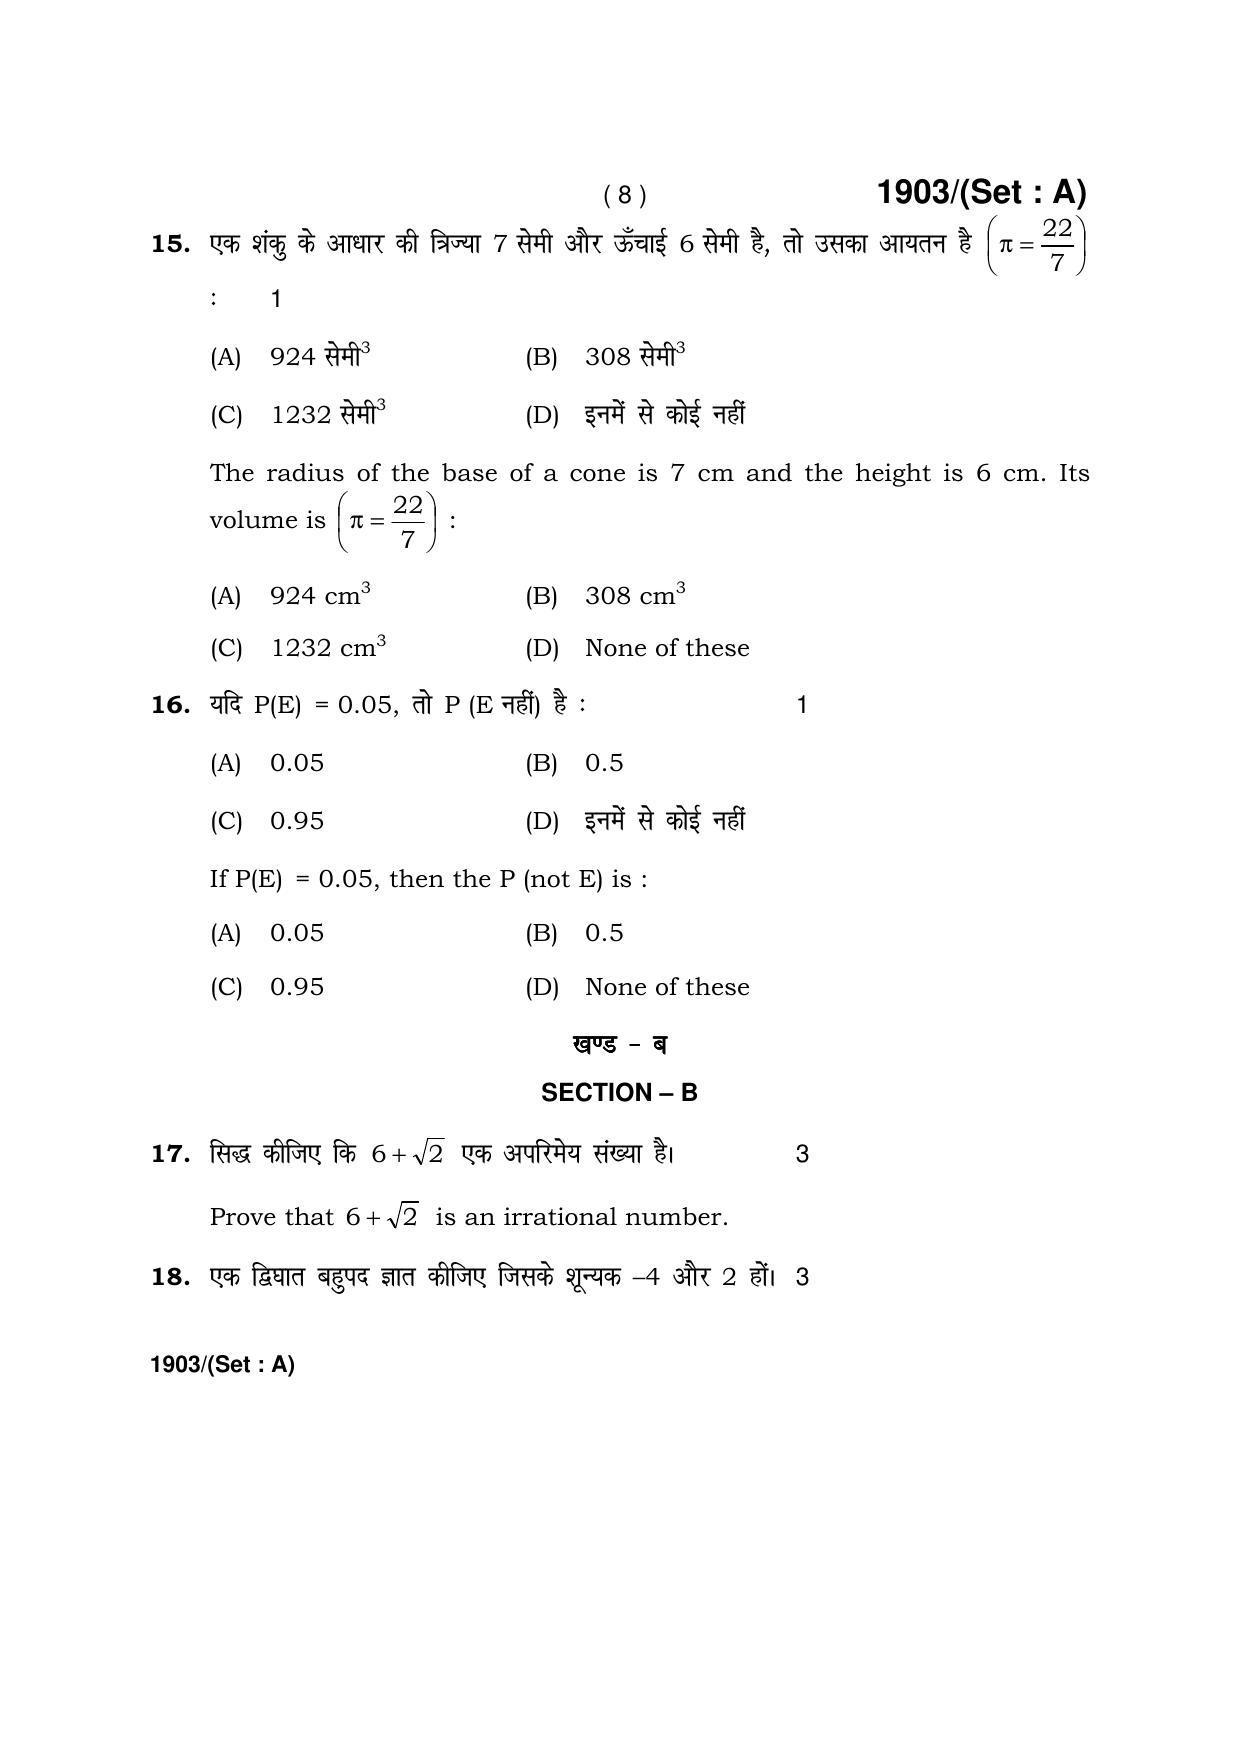 Haryana Board HBSE Class 10 Mathematics -A 2017 Question Paper - Page 8